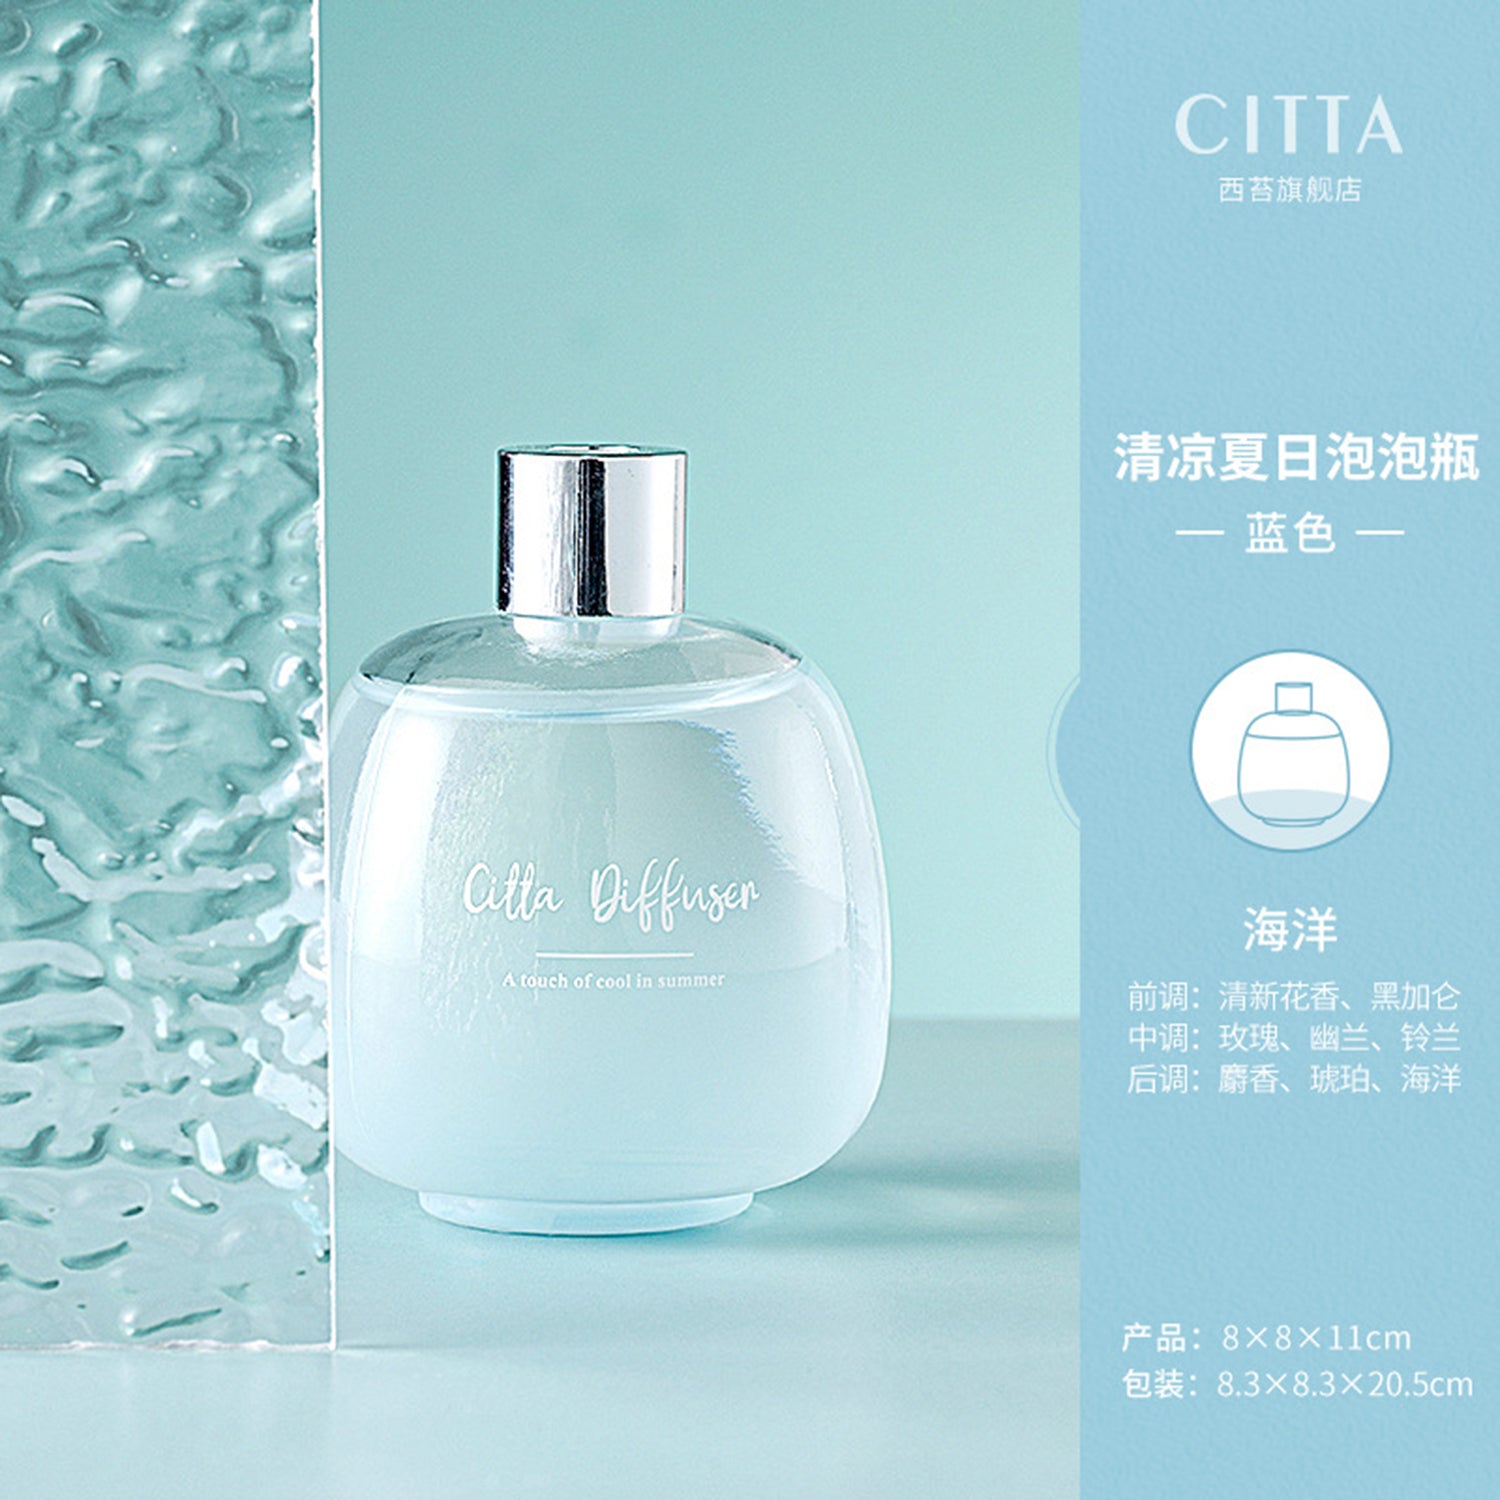 CITTA Cool Summer Series Reed Diffuser Aromatherapy 200ML Premium Essential Oil with Reed Stick Reed Diffuser CITTA Blue / Ocean 